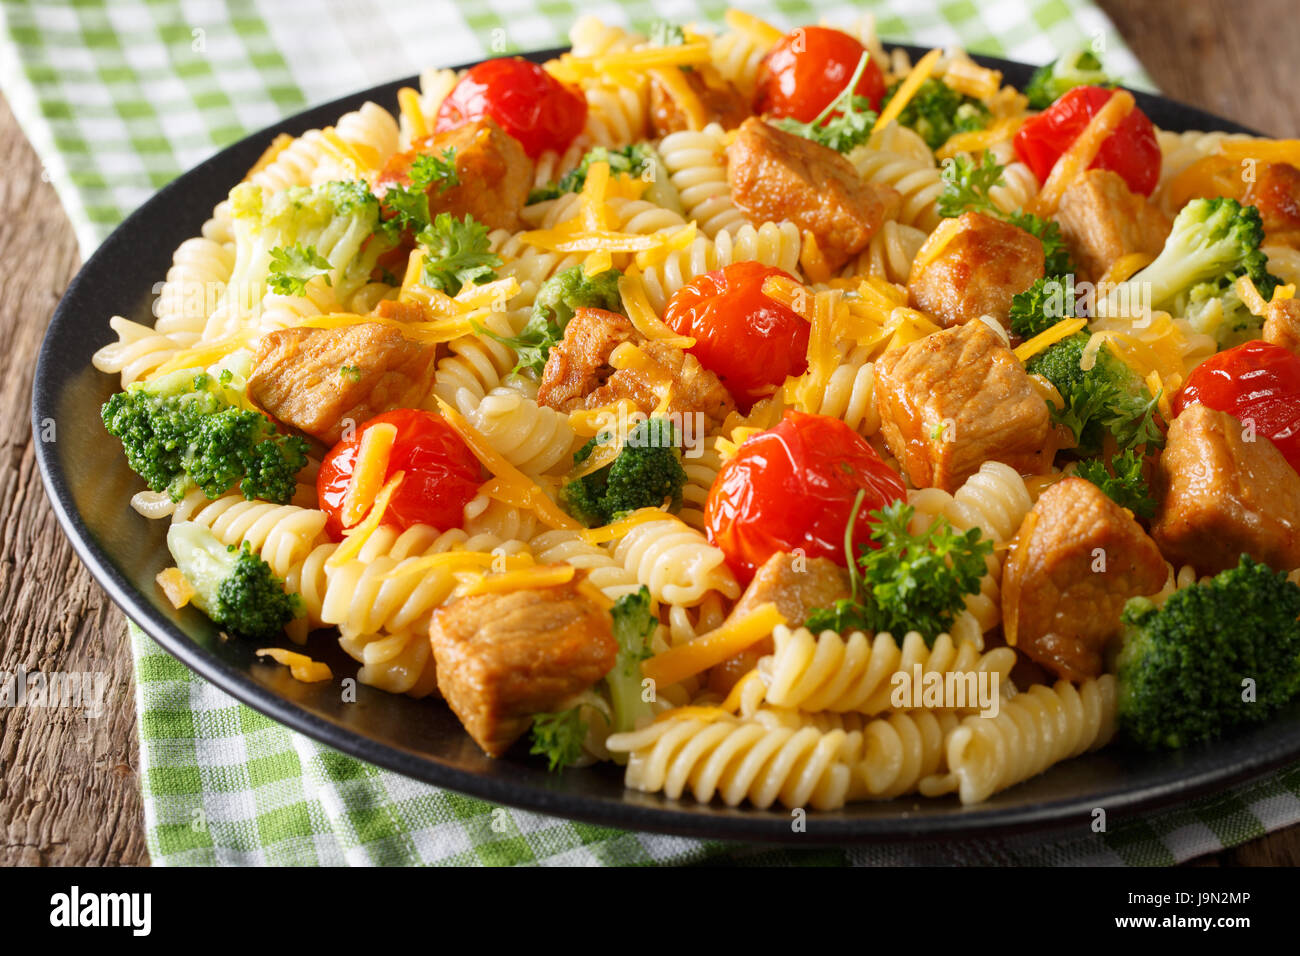 Delicious food: Italian pasta with slices of pork, broccoli, tomatoes and cheddar close-up on a plate. horizontal Stock Photo